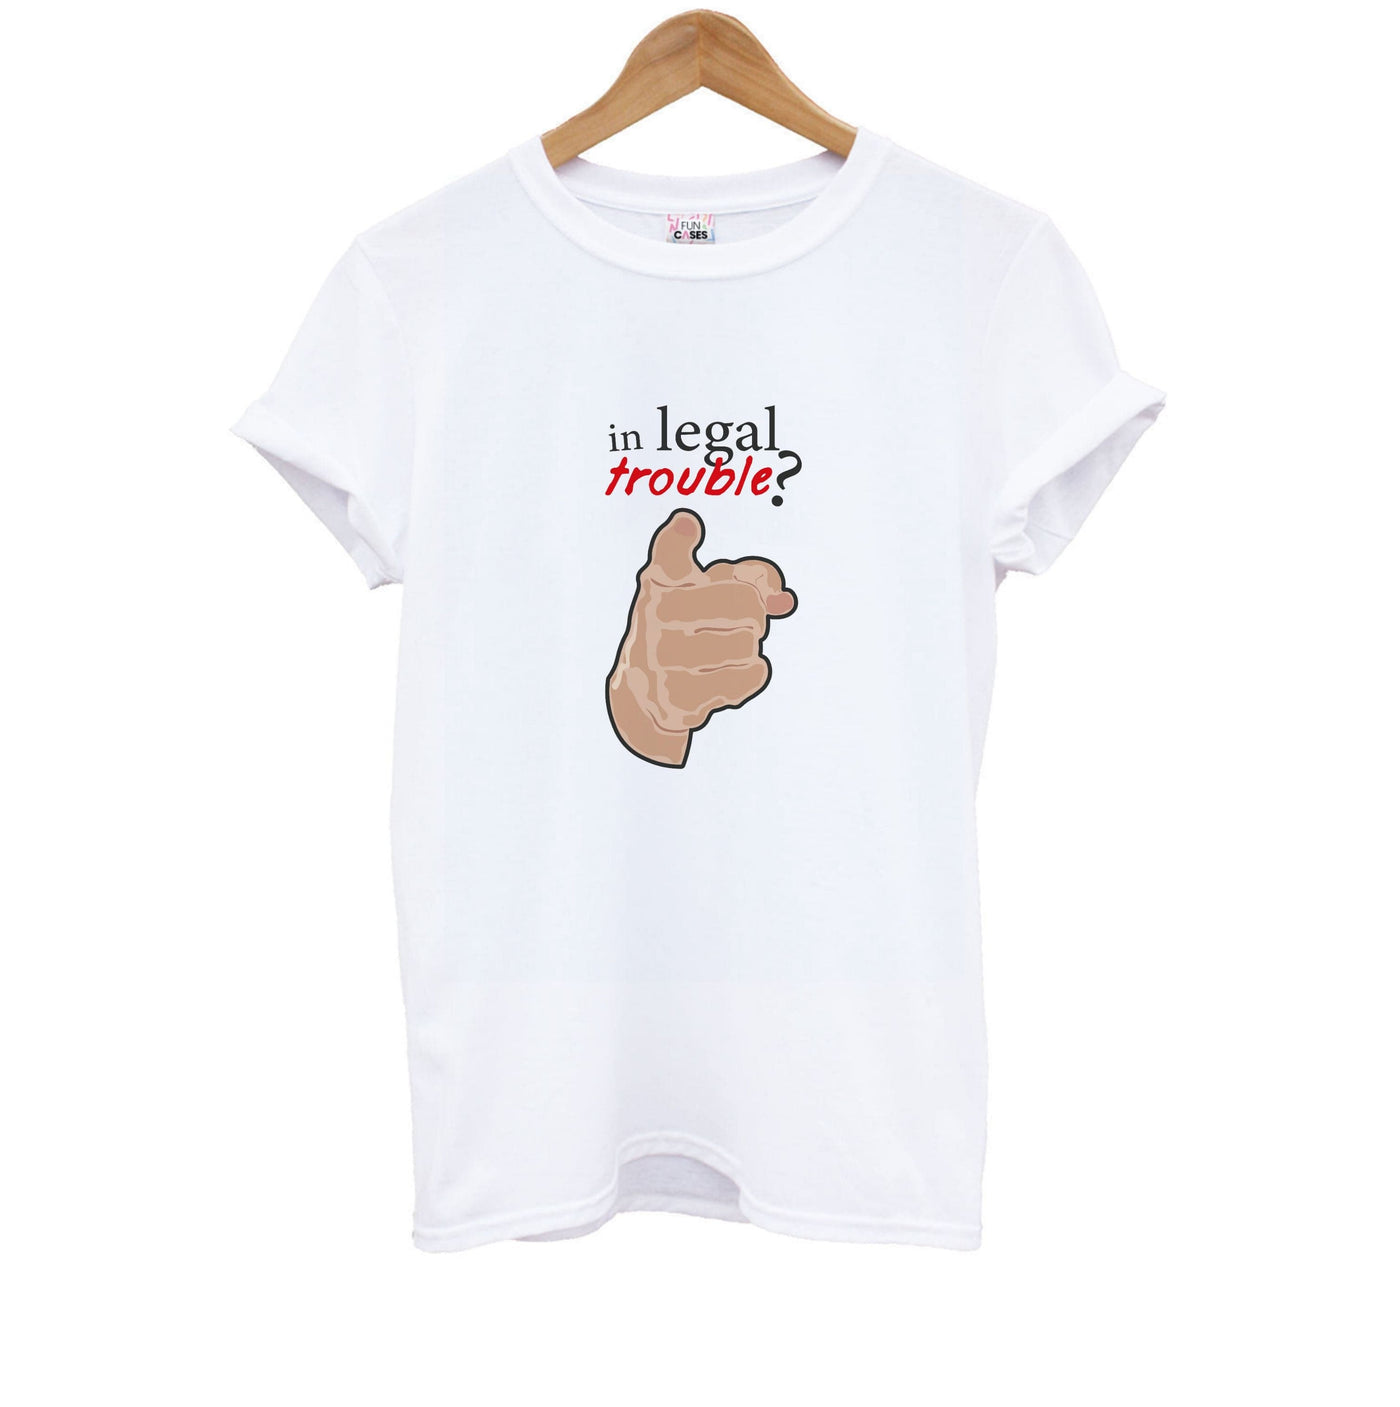 In Legal Trouble? - Better Call Saul Kids T-Shirt